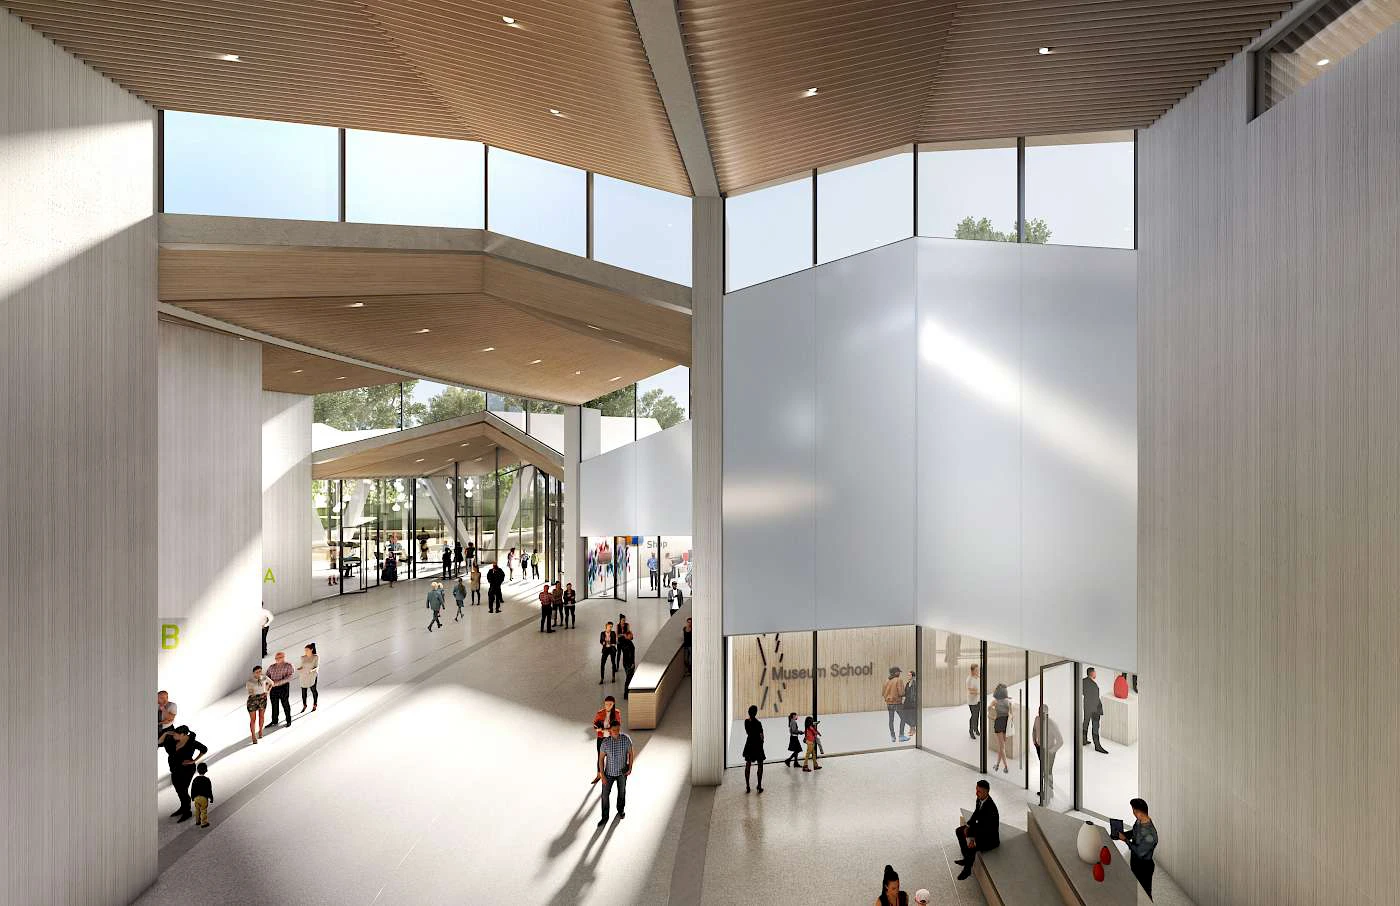 View toward MacArthur Park from the Atrium, which connects the Arkansas Arts Center’s three programmatic pillars: the Museum School, Galleries, and Children’s Theatre. Image courtesy of Studio Gang.